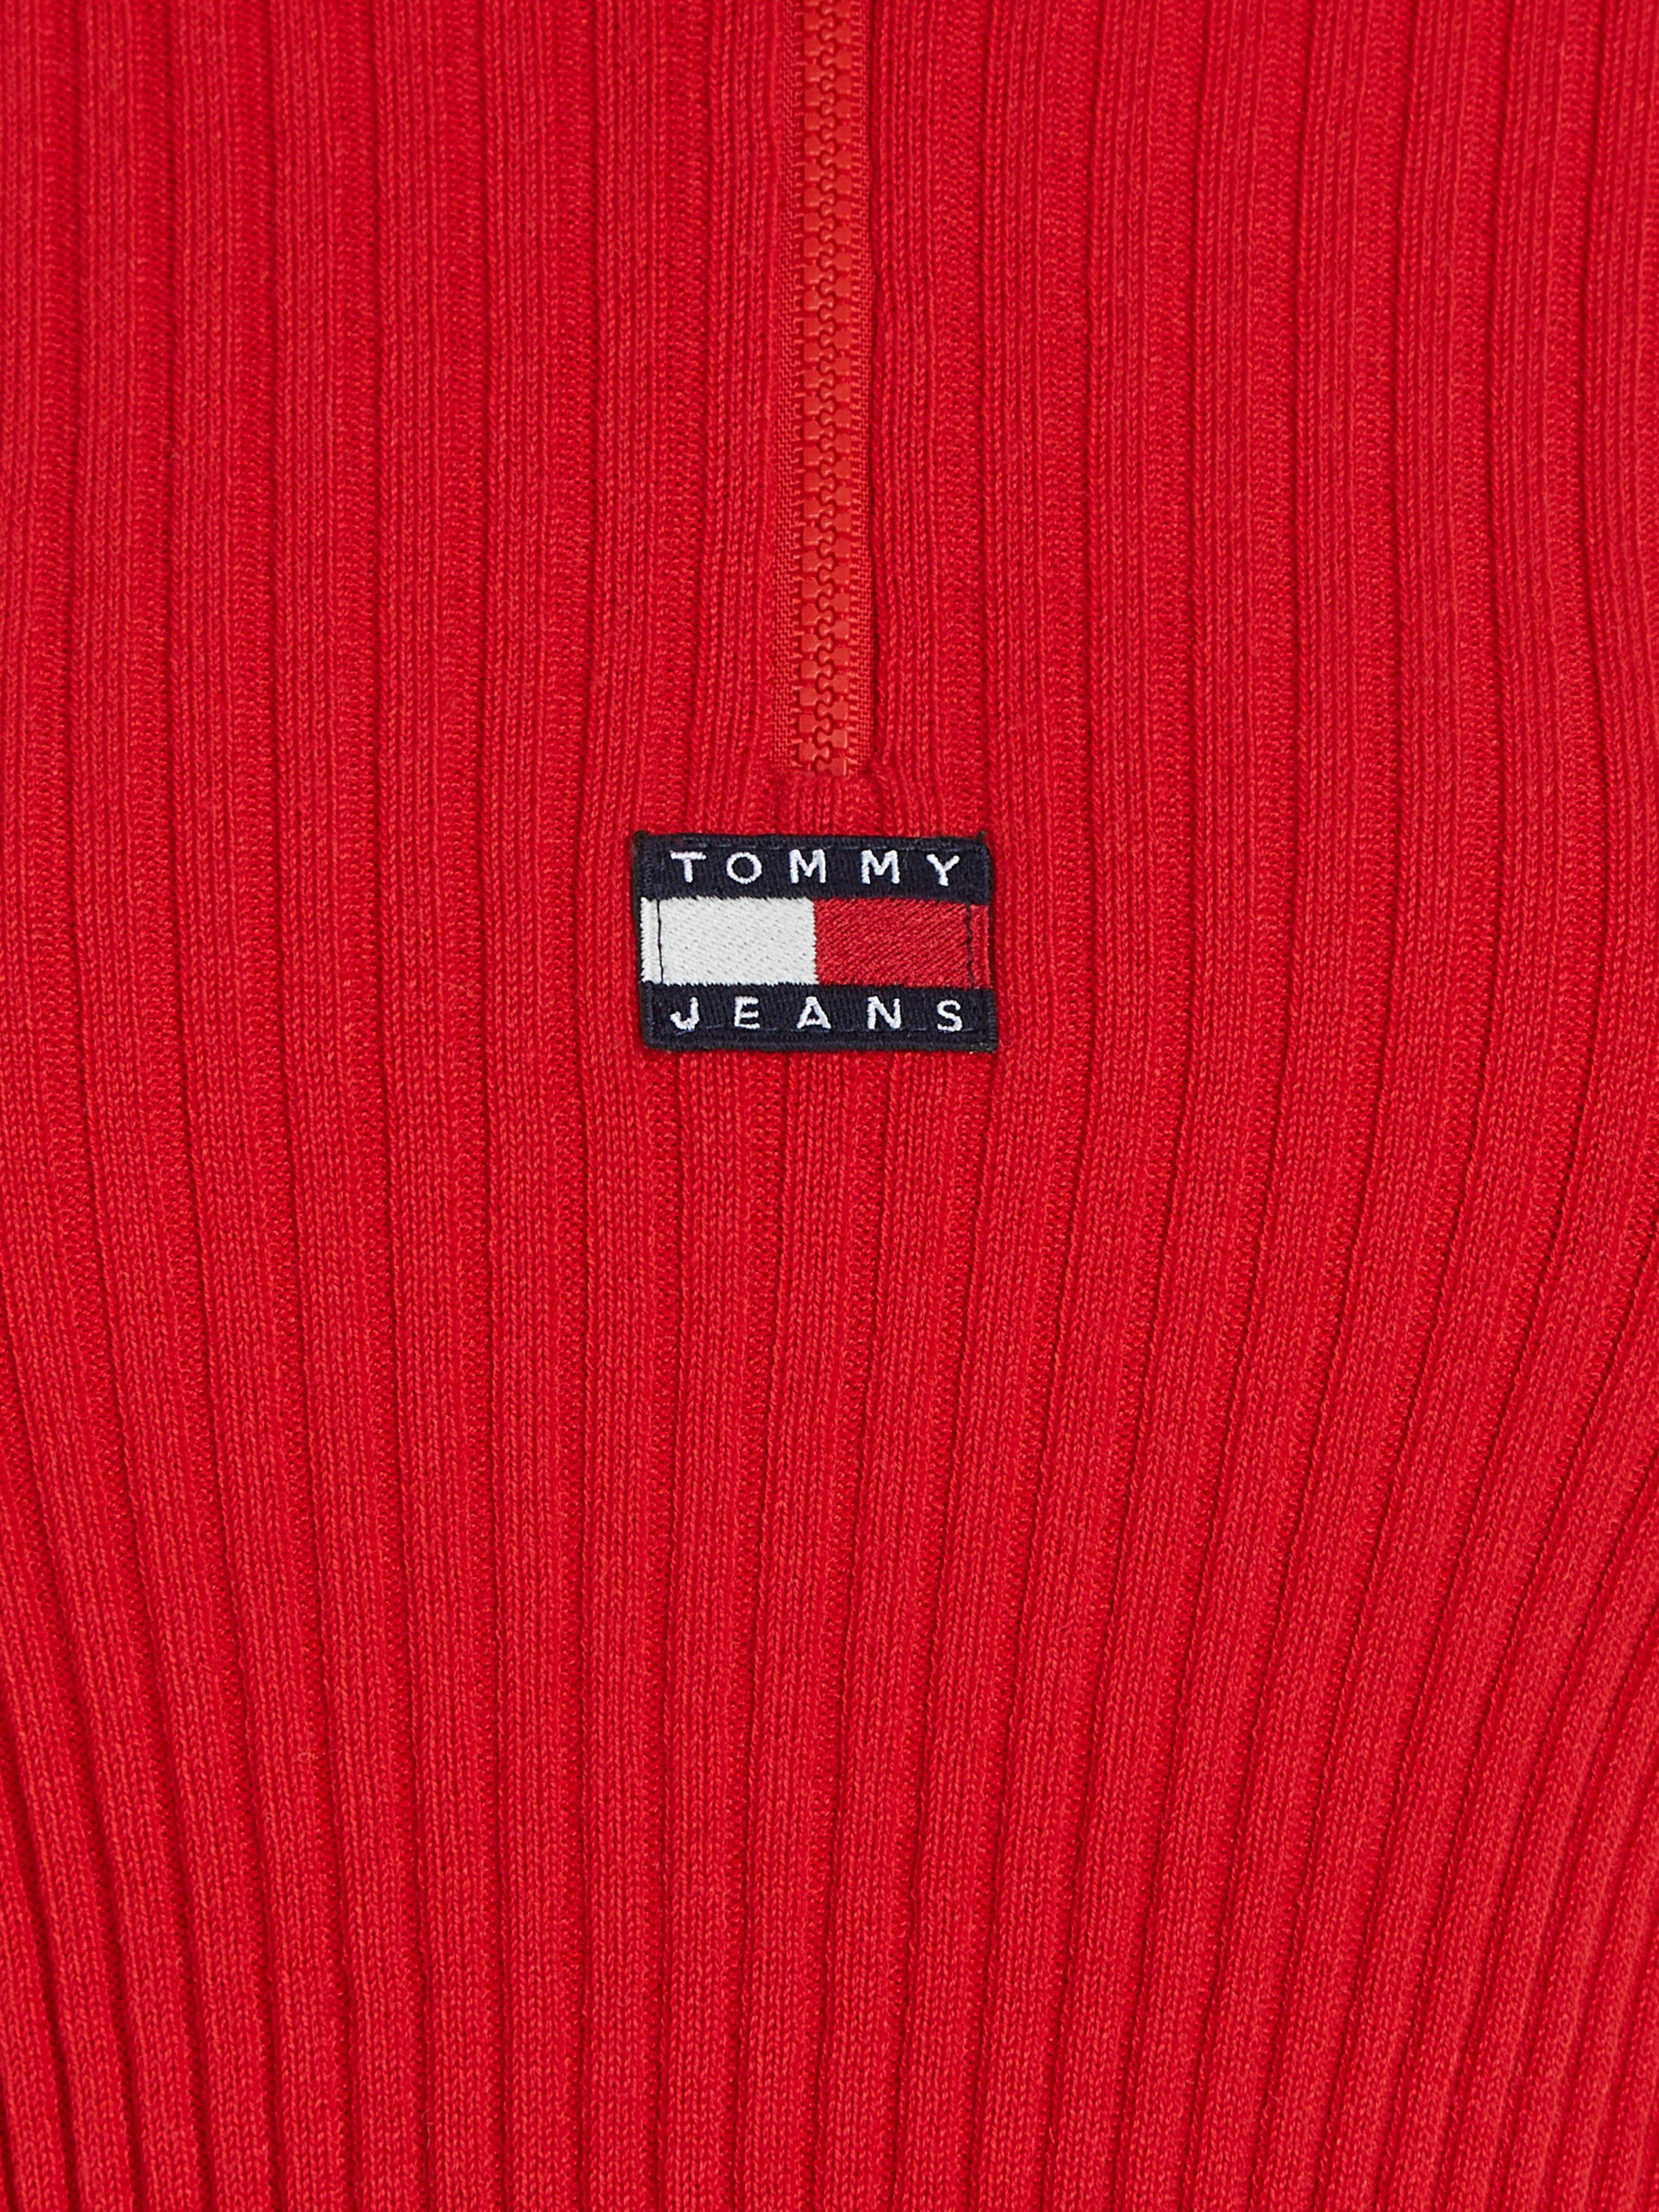 Jeans Strickpullover Tommy hellrot Markenlabel Tommy Jeans mit